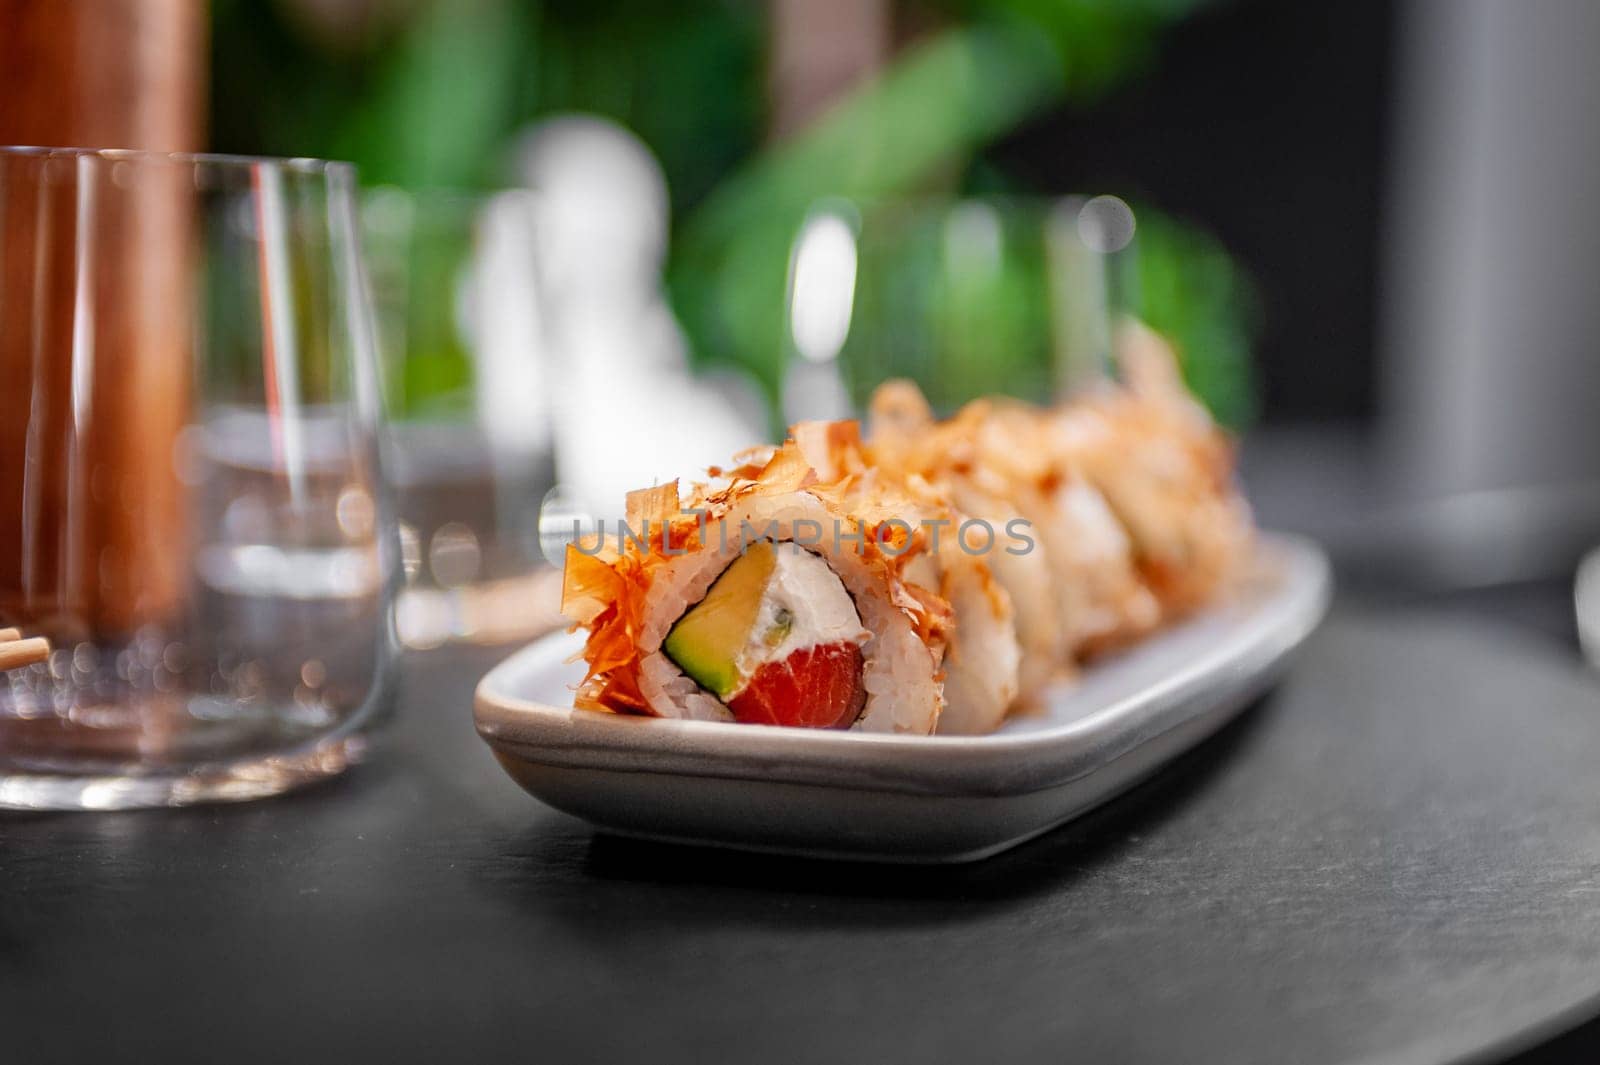 Classic Bonito sushi roll set with tuna flakes, salmon and avocado. Japanese dish of fresh salmon and rice. High quality photo